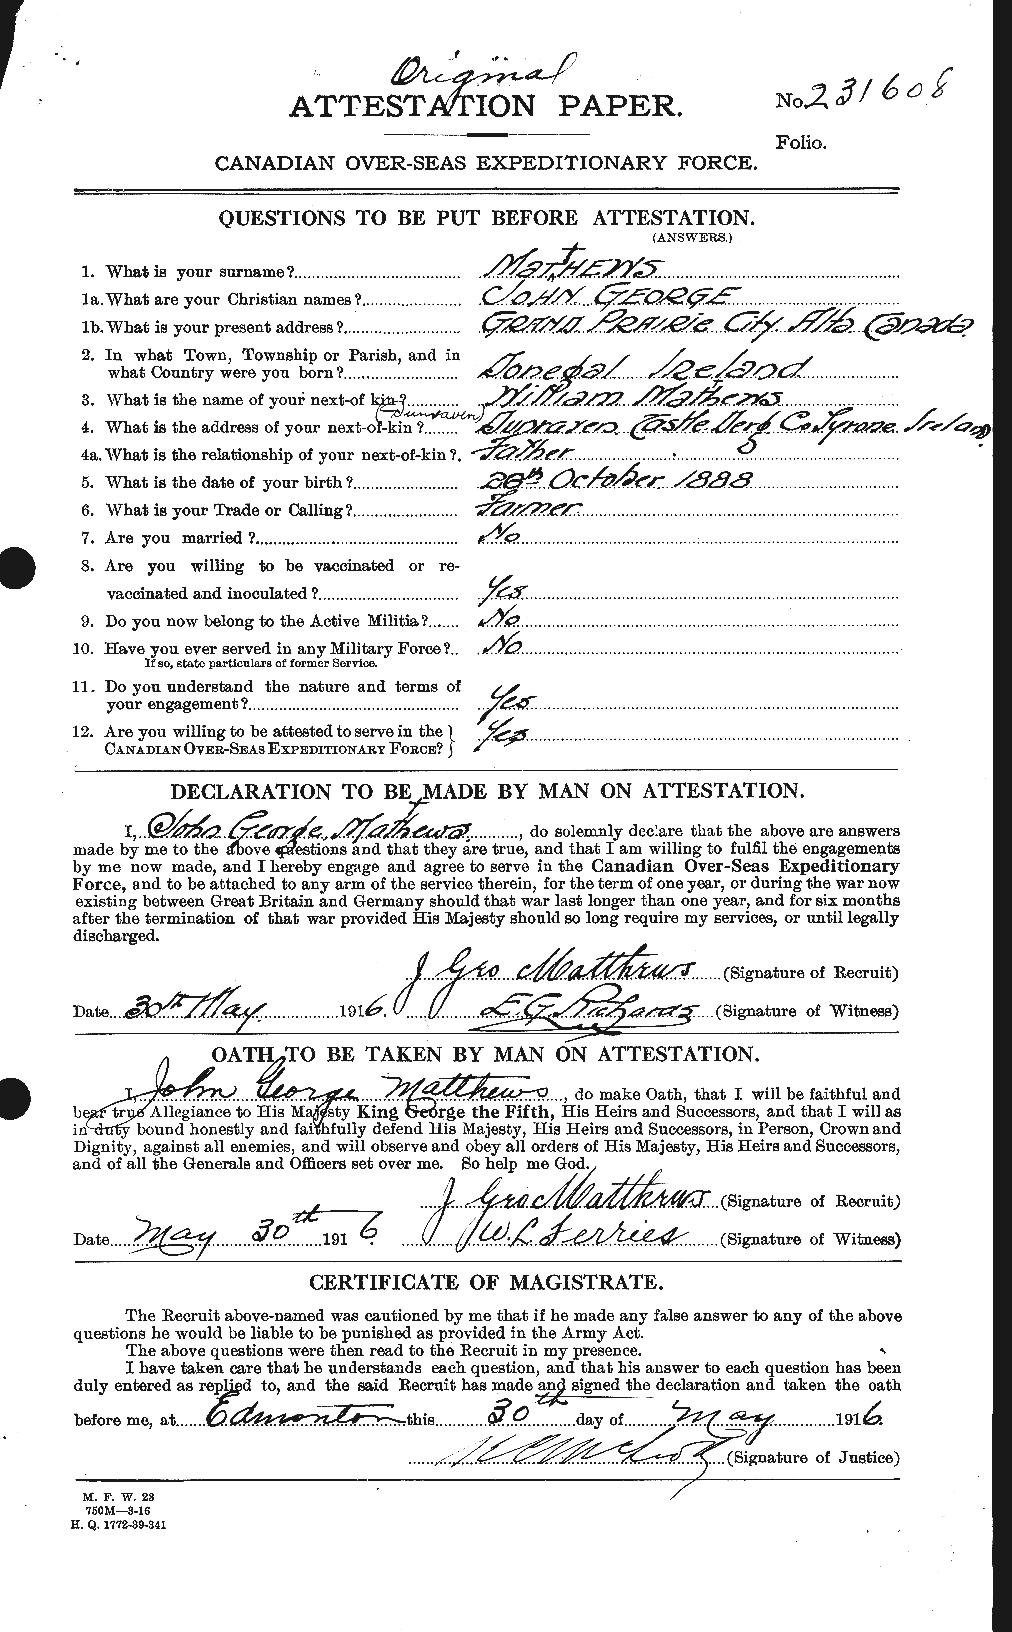 Personnel Records of the First World War - CEF 491235a